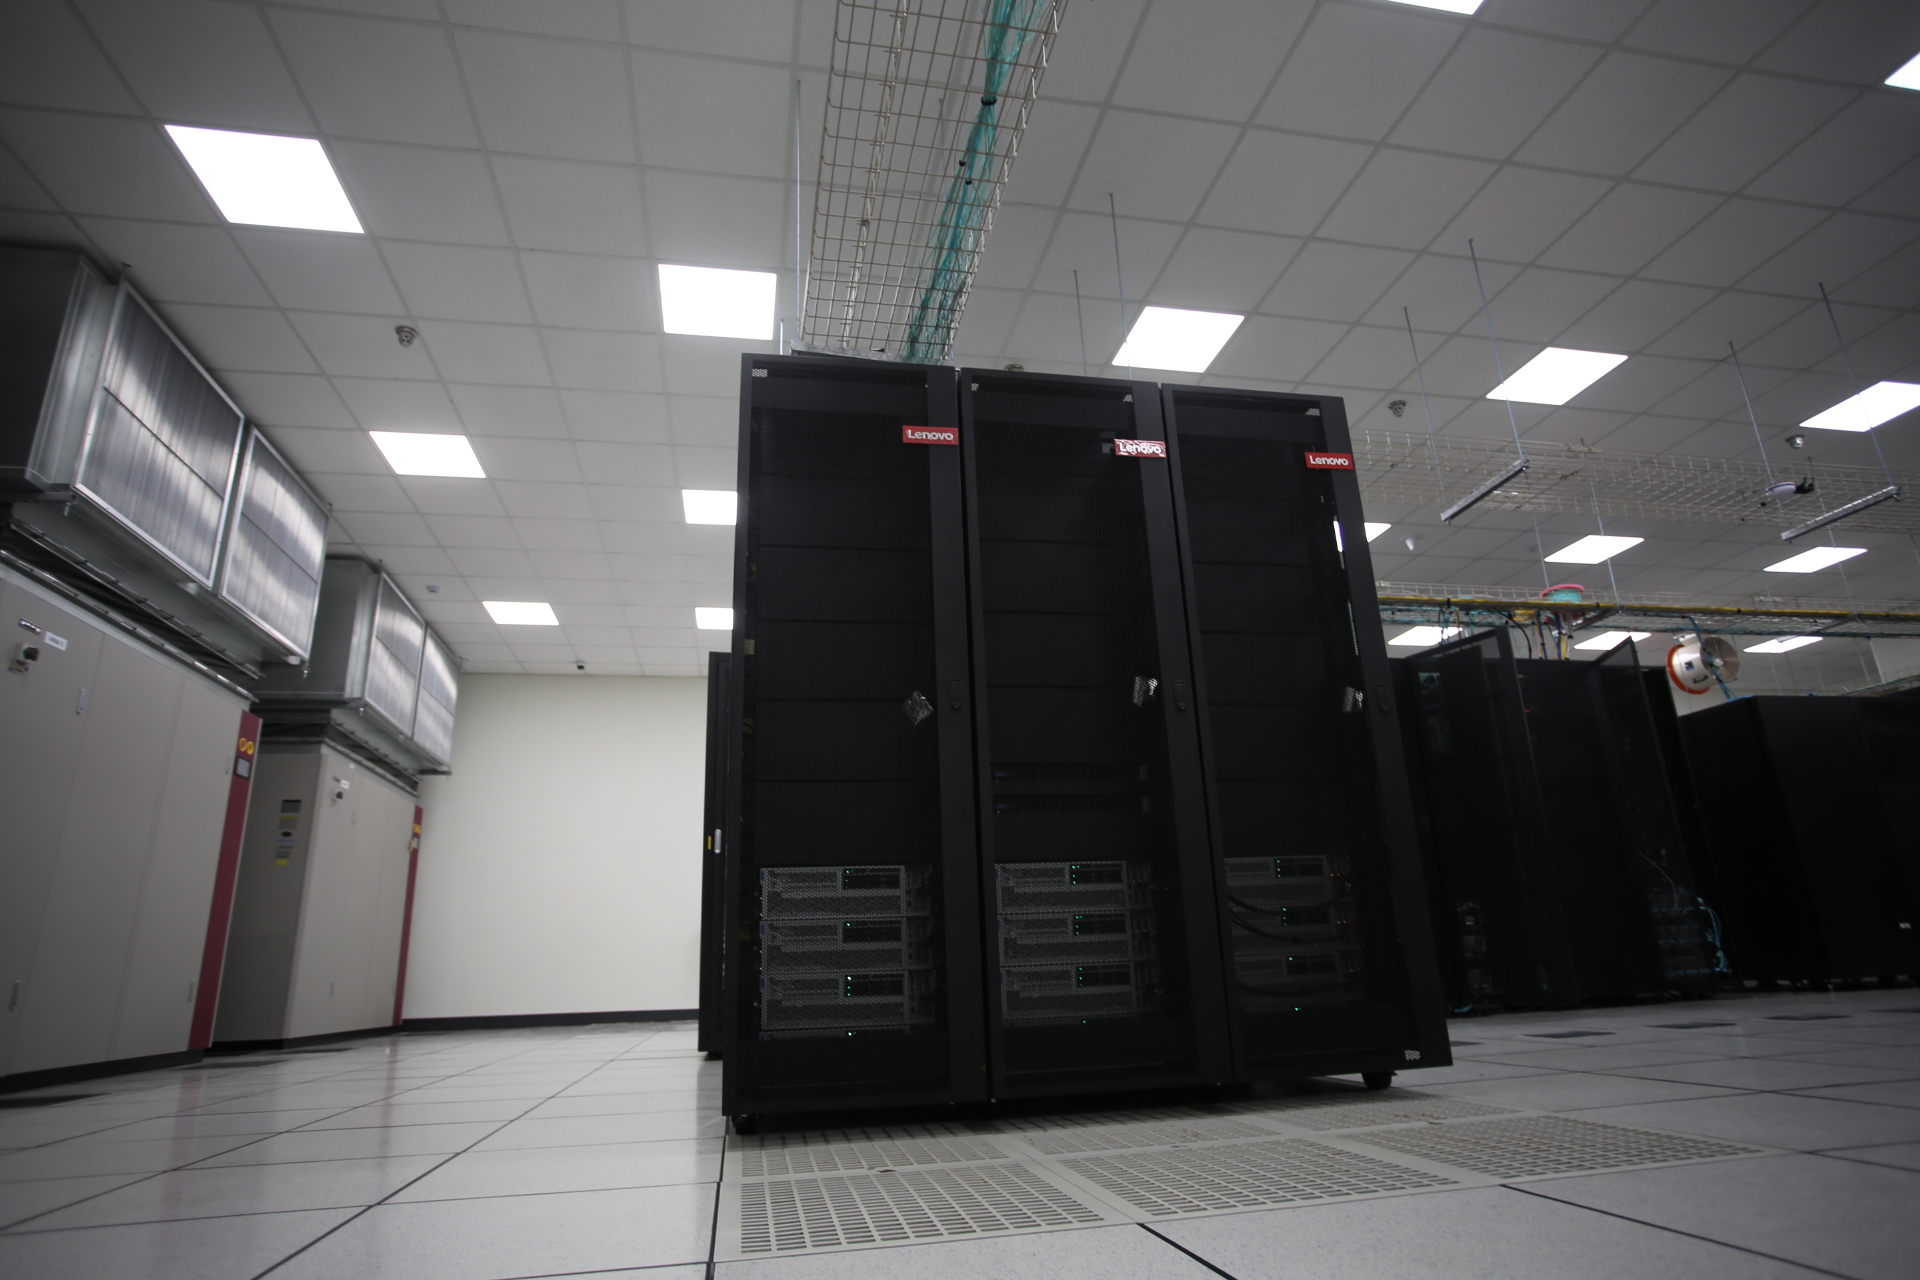 Image of 2nd IBS Supercomputer Olaf